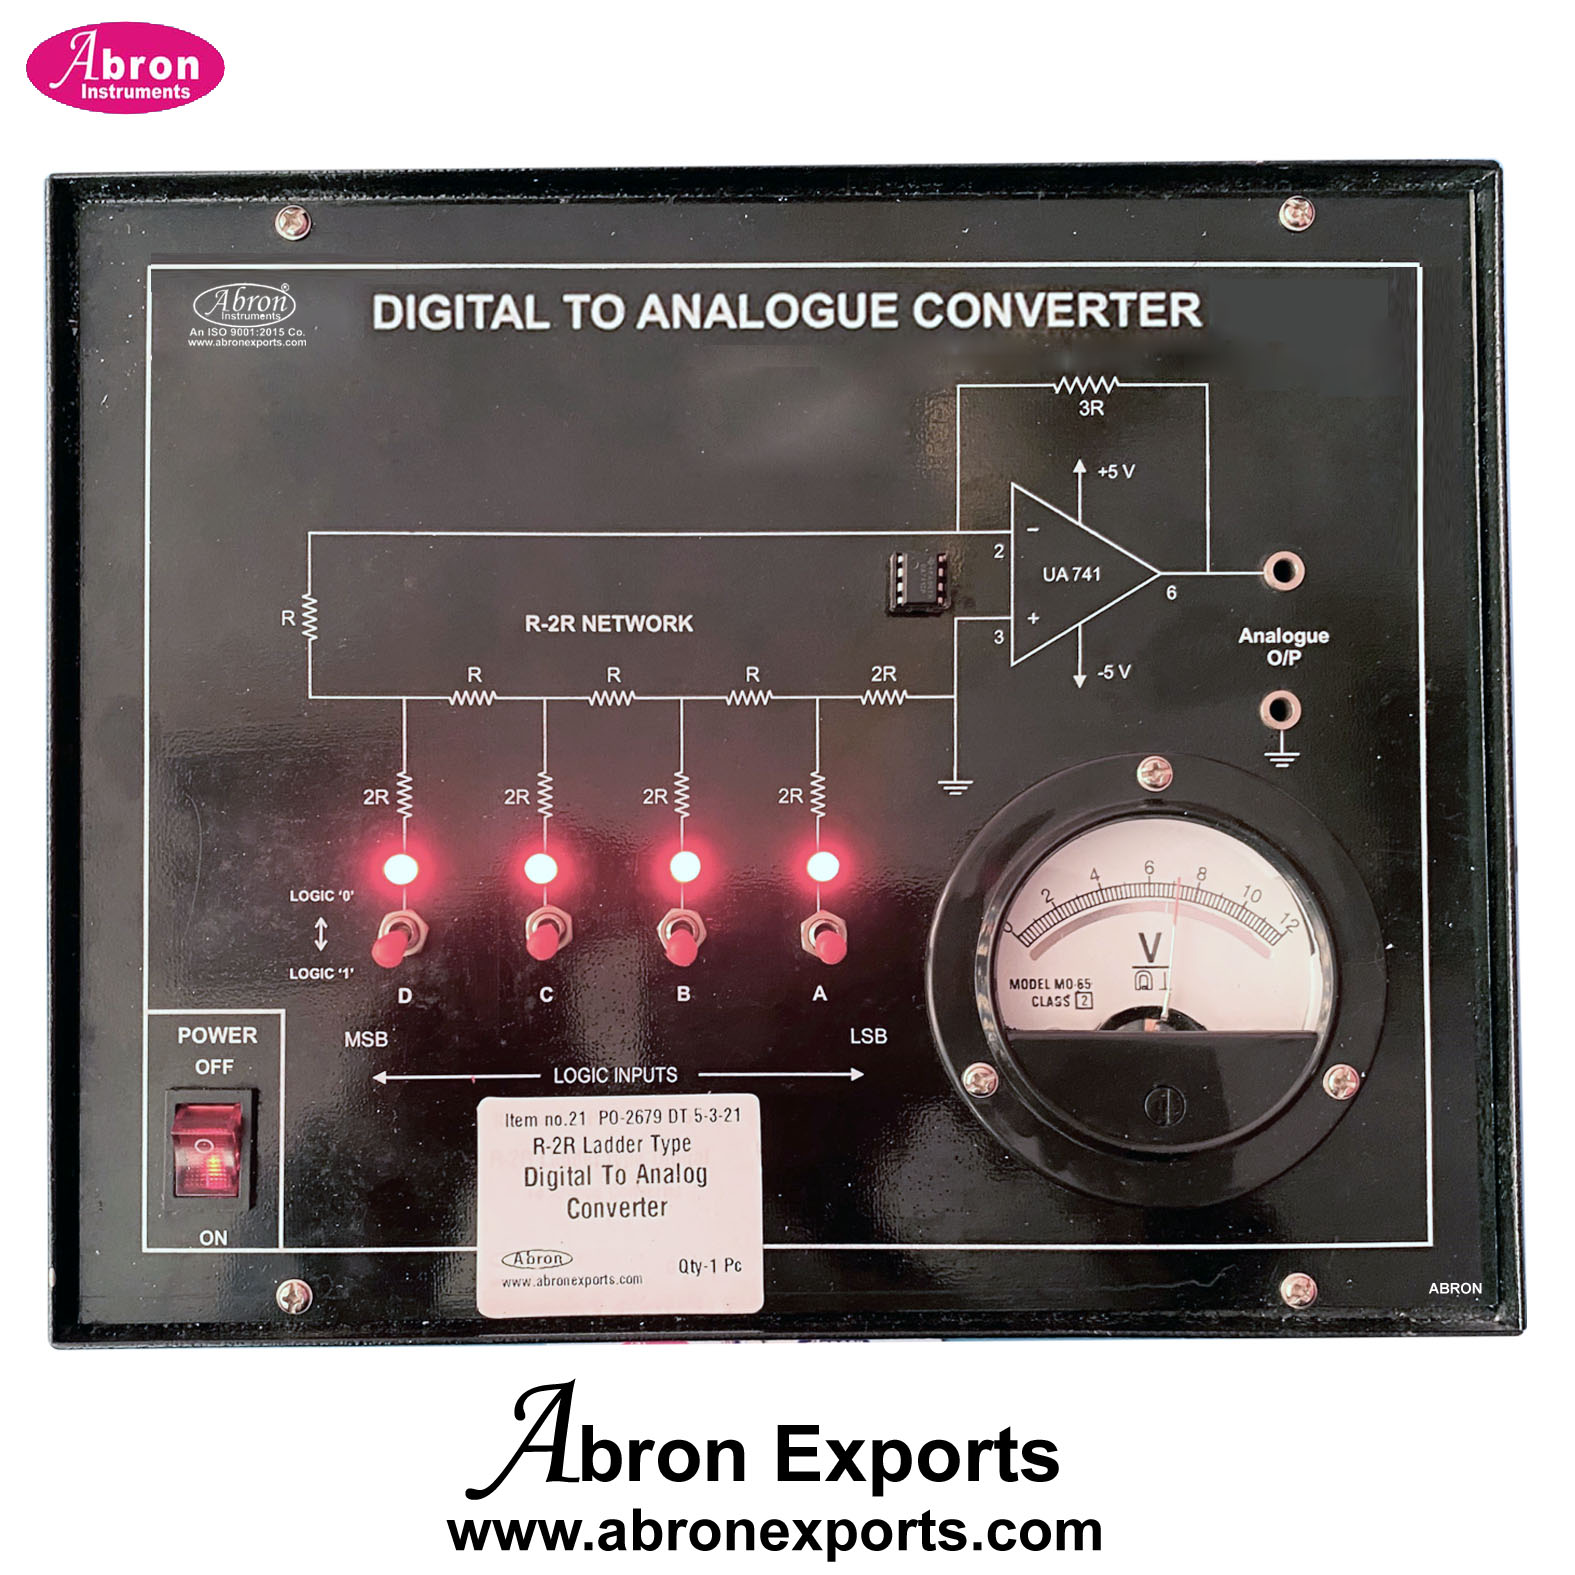 Digital To Analog Converter D to A Electronic Trainer with Power Supply Led One Meter Abron AE-1202D 